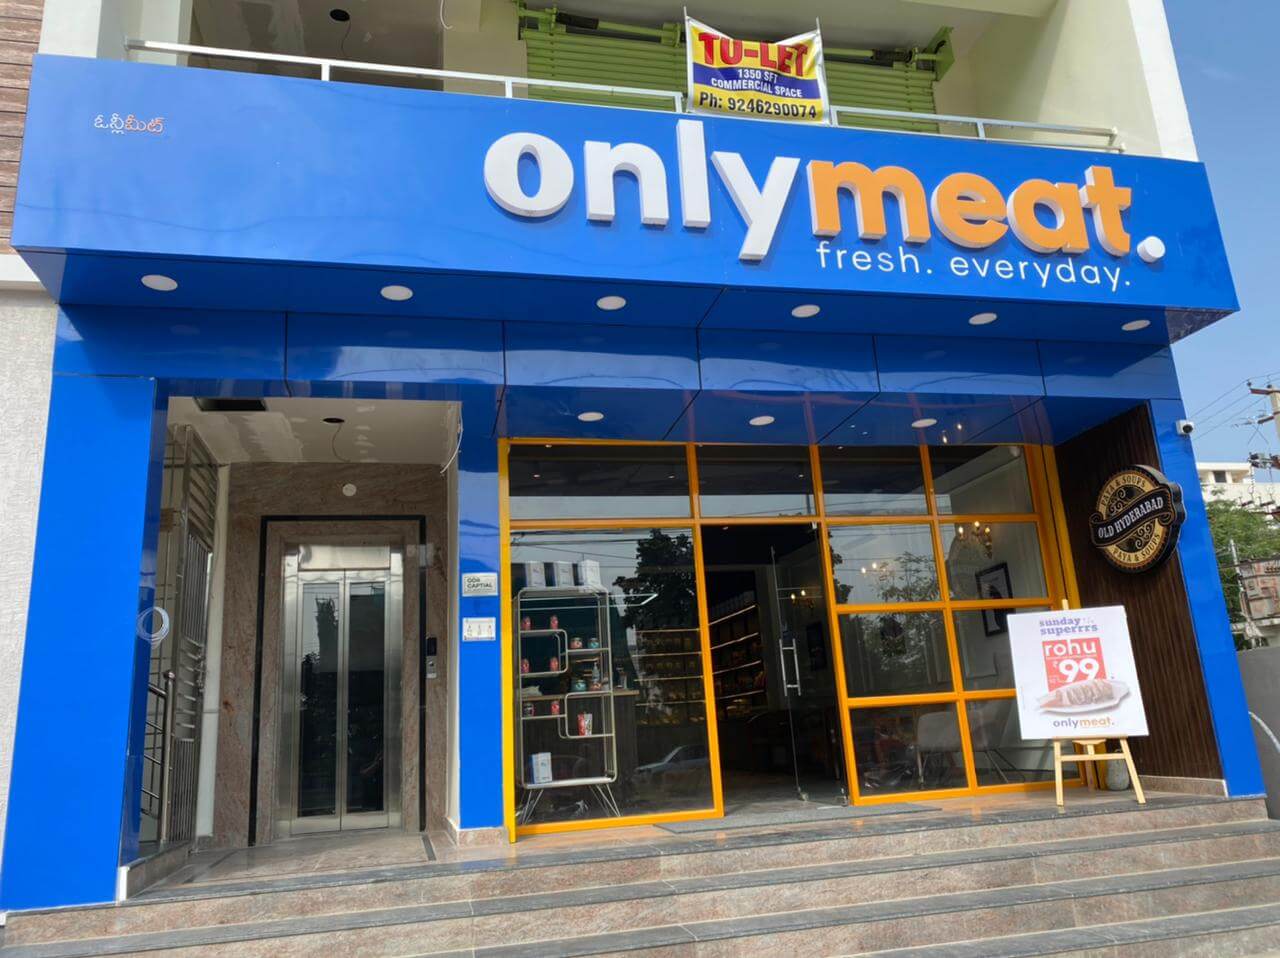 ONLY MEAT to expand its footprint Plans to have 40 supermarket-style meat shops by the end of 2021 Hyderabad: City-based ONLY MEAT, a game changer in the world of meat market, is planning to expand its footprint by setting up new stores in Hyderabad, Bengaluru, Visakhapatnam and Vijayawada, thus taking its store count to 40 by the end of 2021 from two now